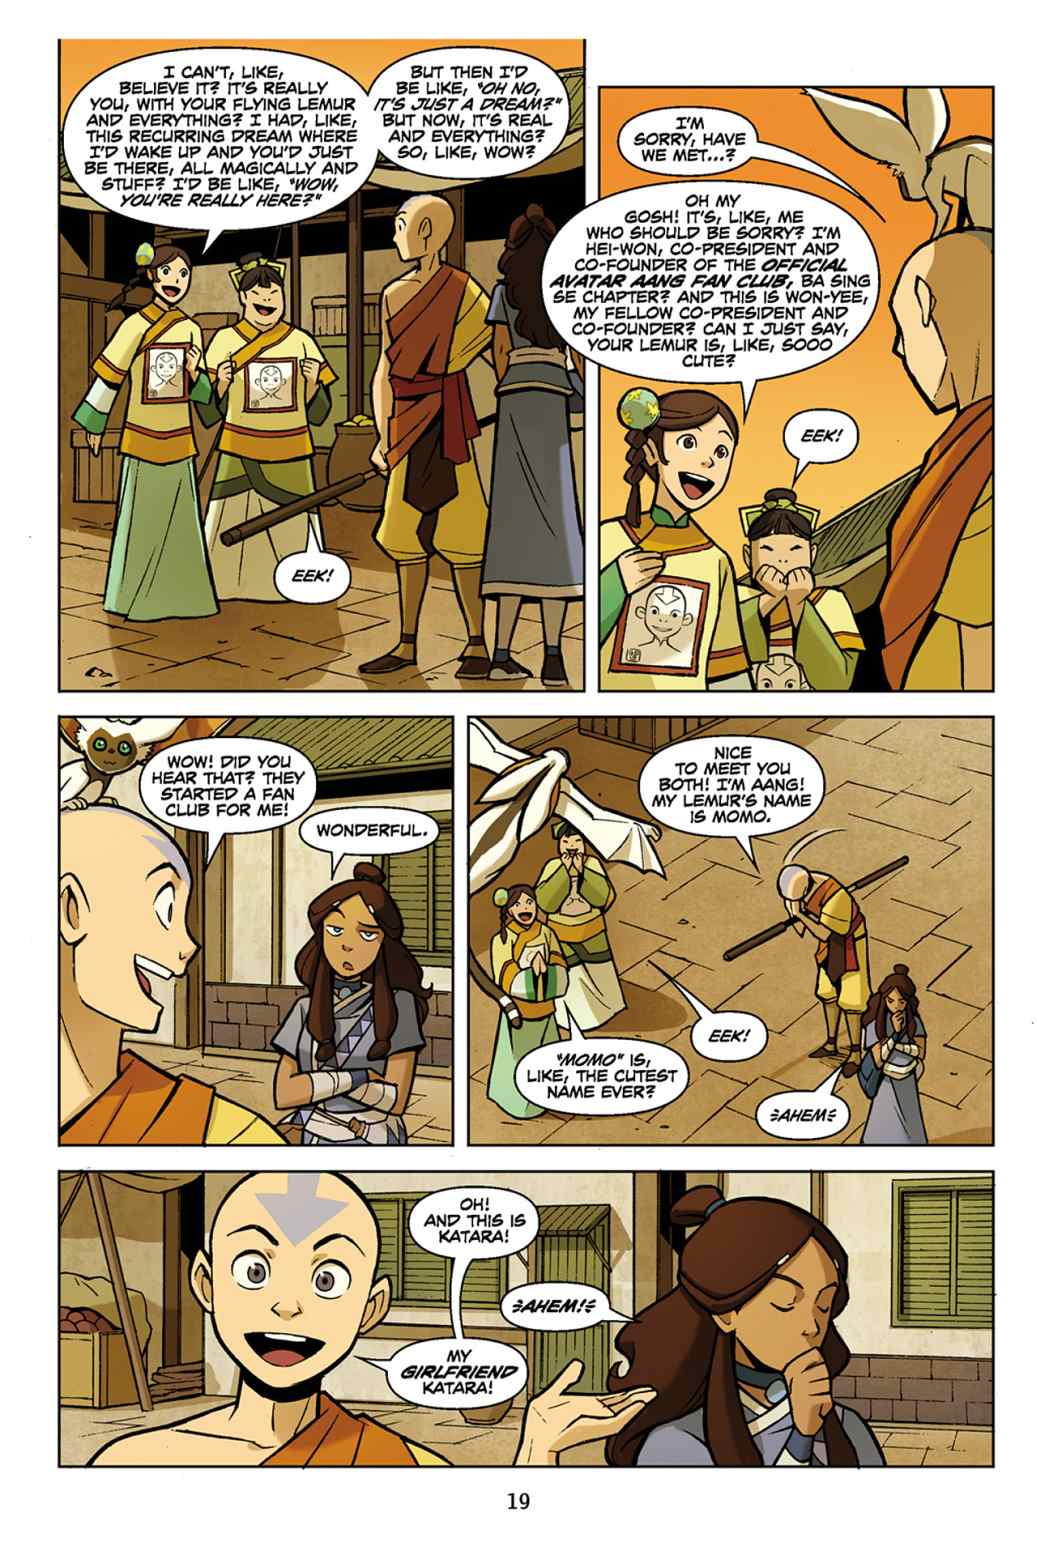 Read Comics Online Free Avatar The Last Airbender Comic Book Issue 002 Page 20